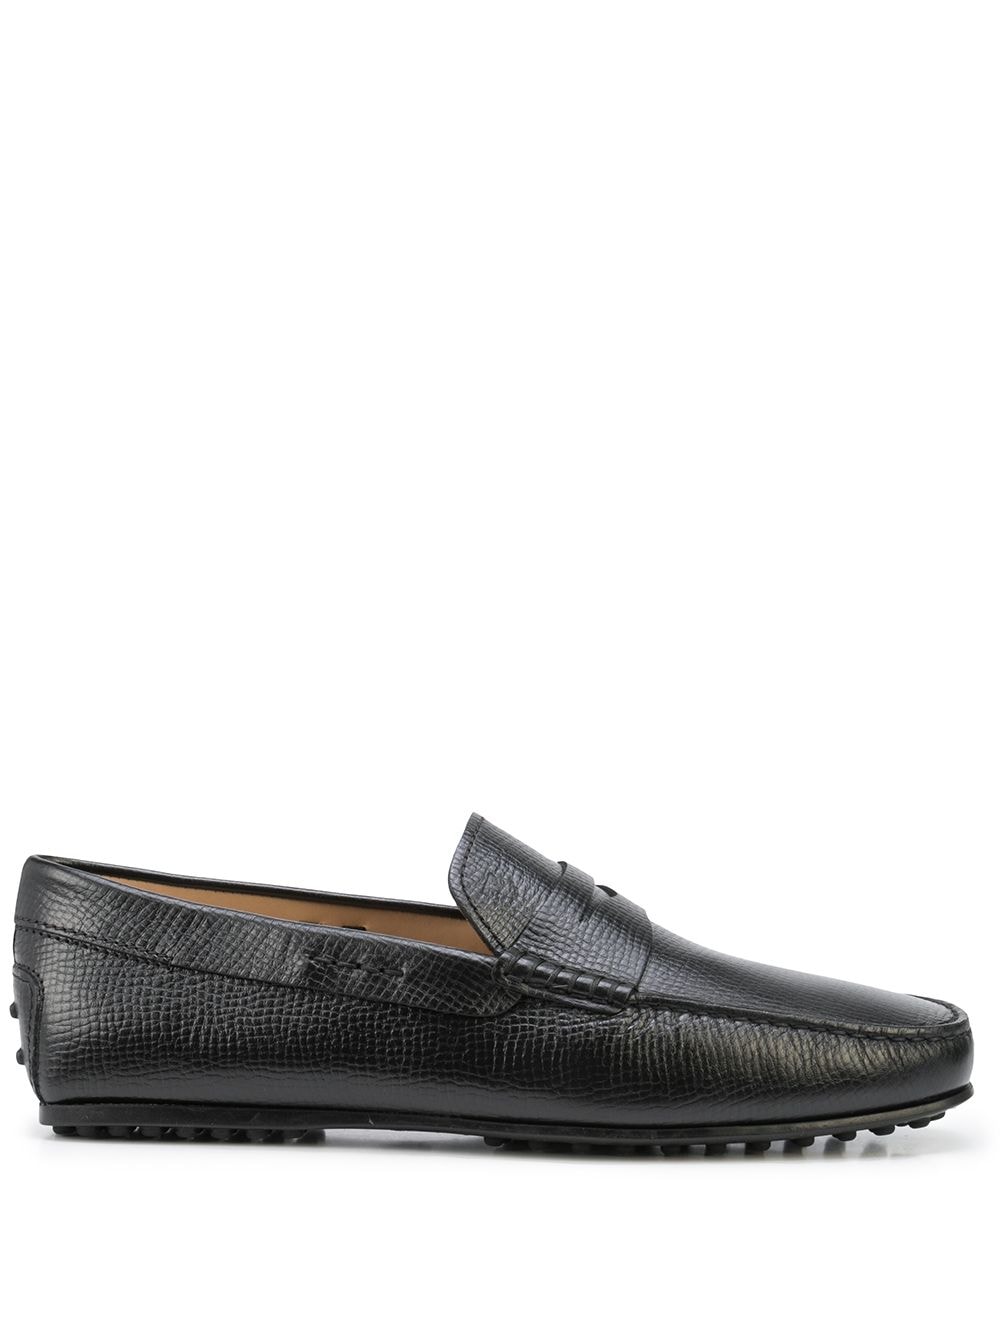 Tod's Grained Leather Penny Loafers - Farfetch